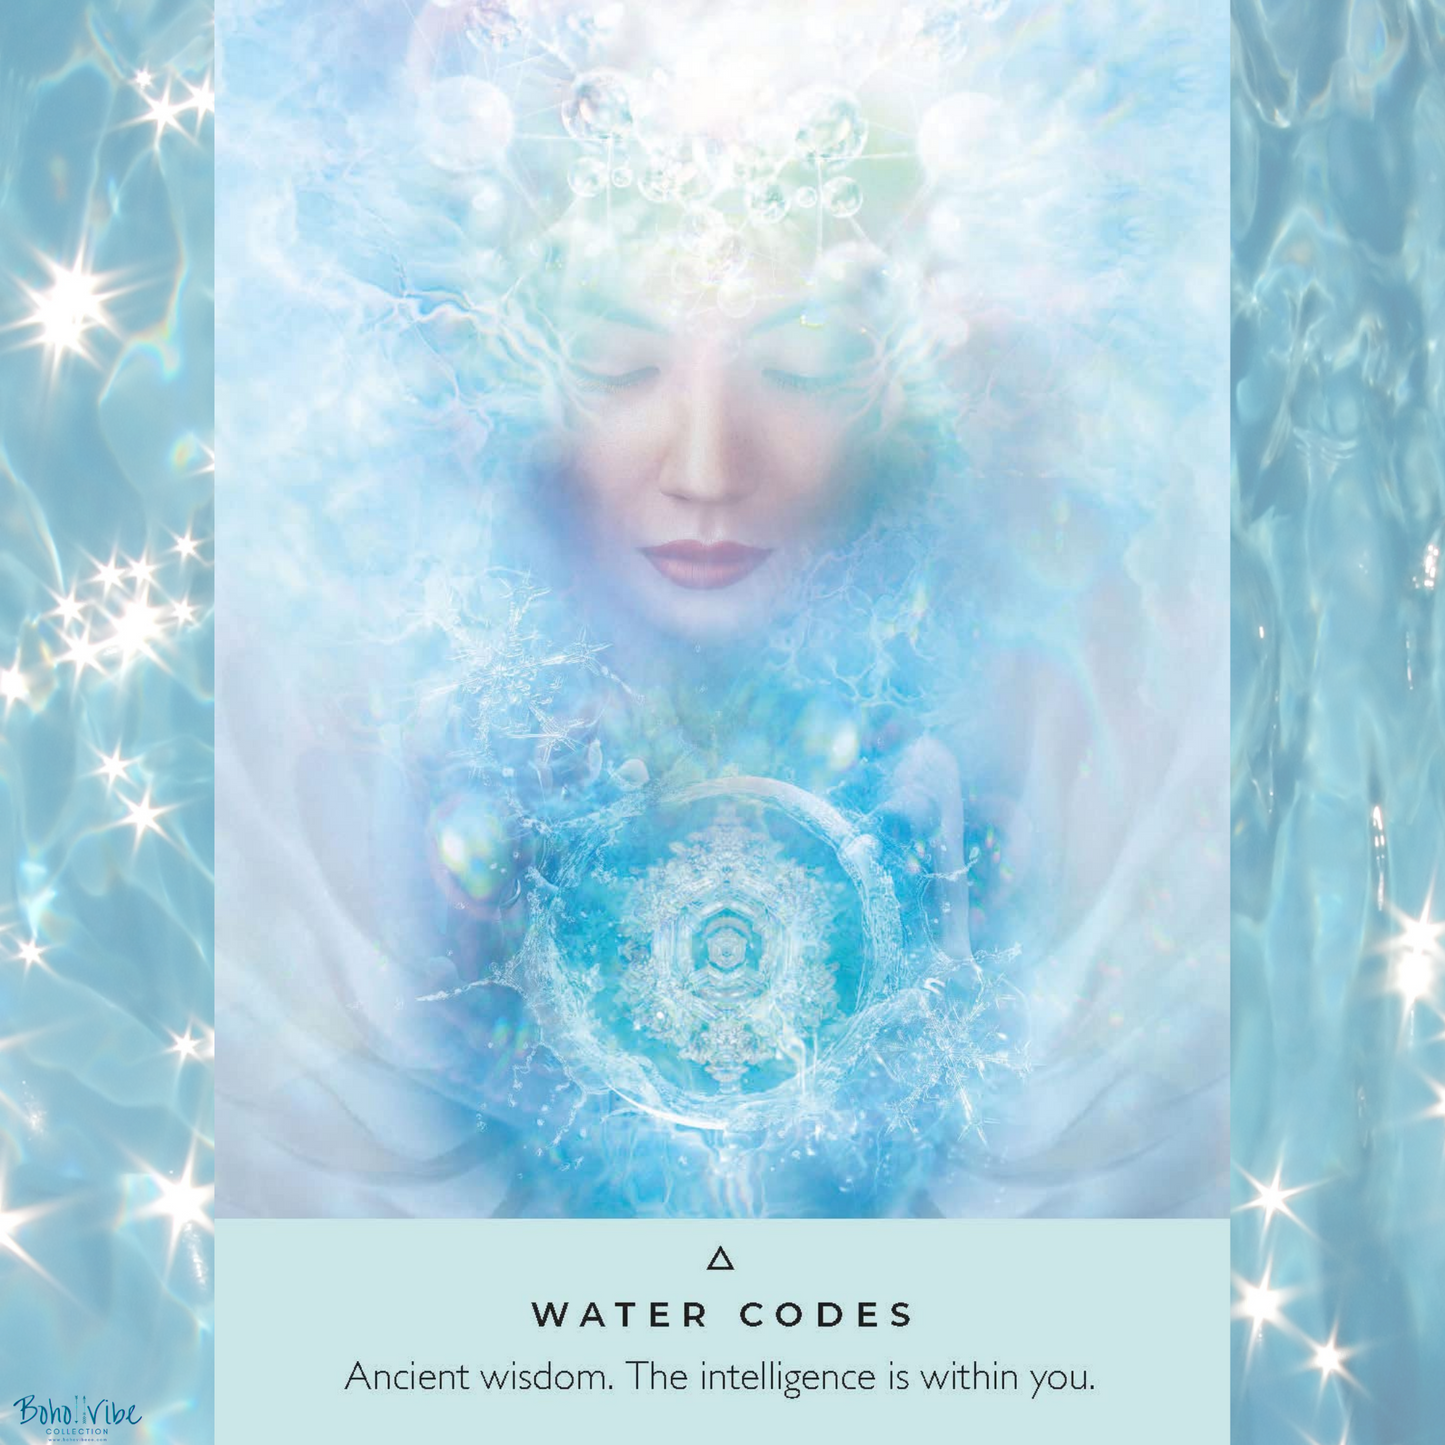 Boho ↡↟ Vibe Collection ↠ The Healing Waters Oracle Card Deck and Guidebook